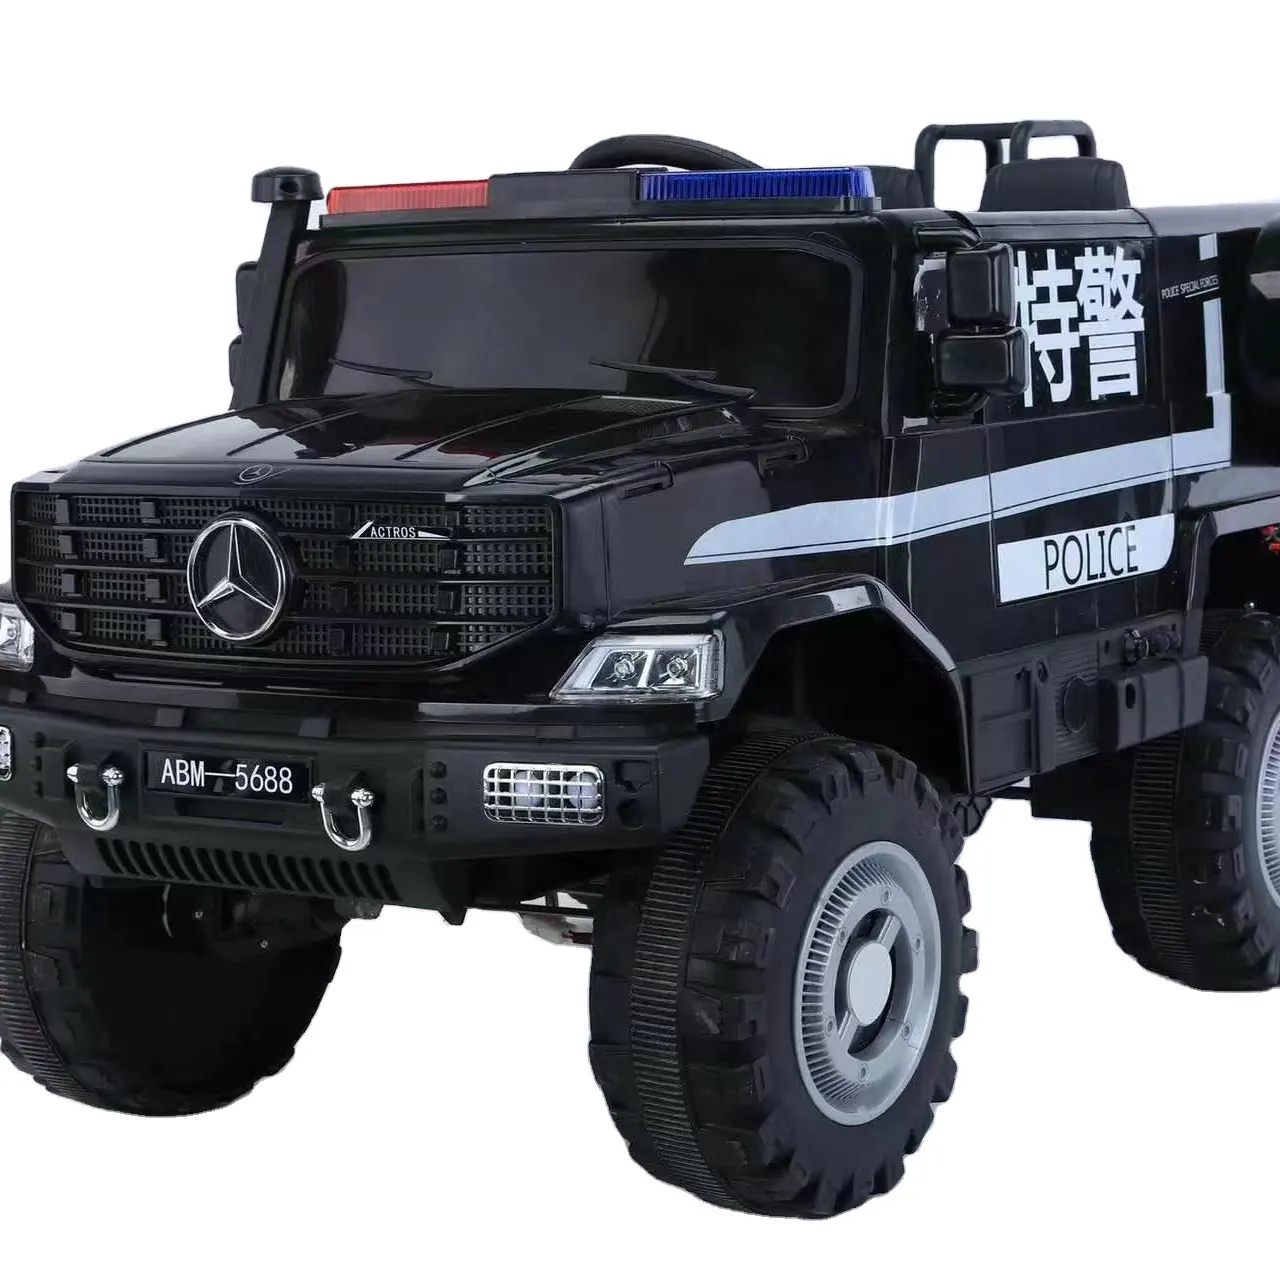 Kids battery operated car ride on toy police car with remote control and Fire Engine